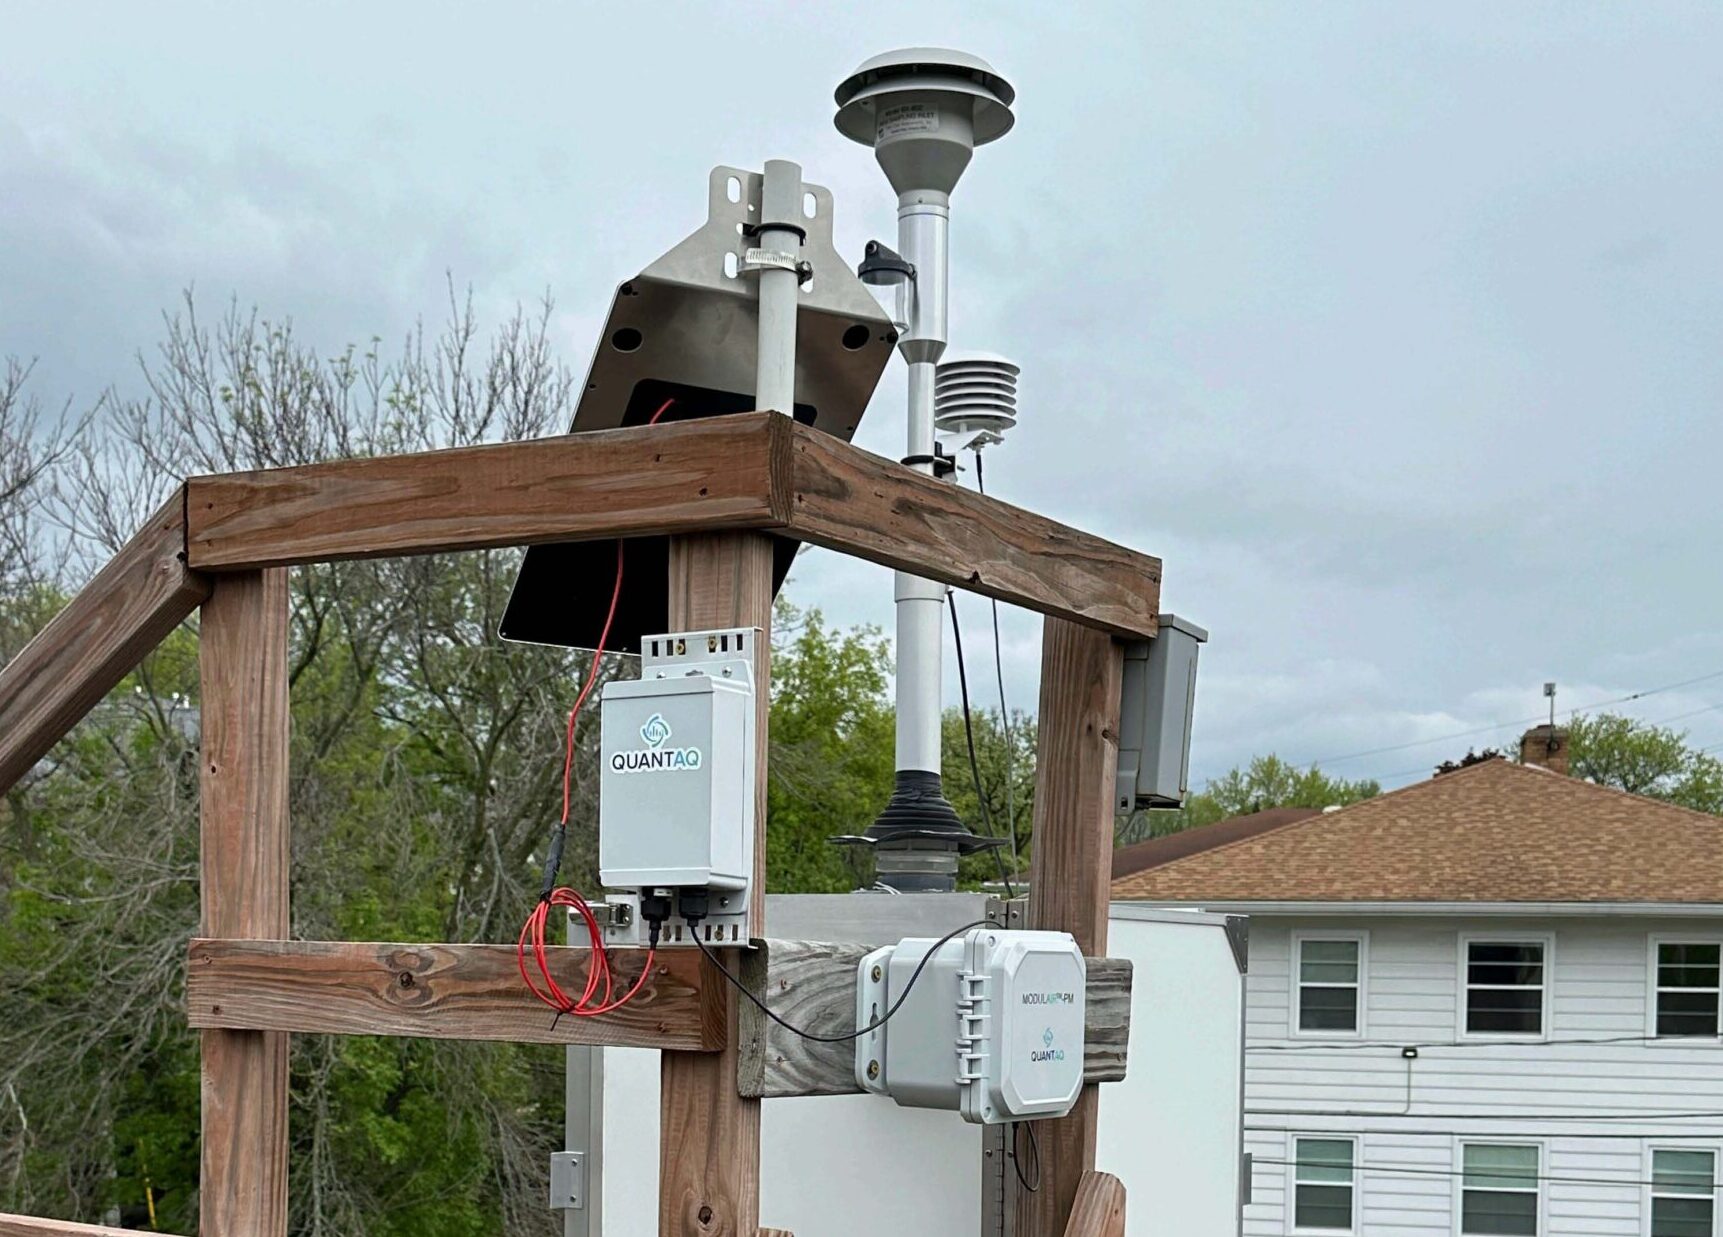 Madison installing air quality sensors to bring ‘hyper-local’ pollution data to neighborhoods